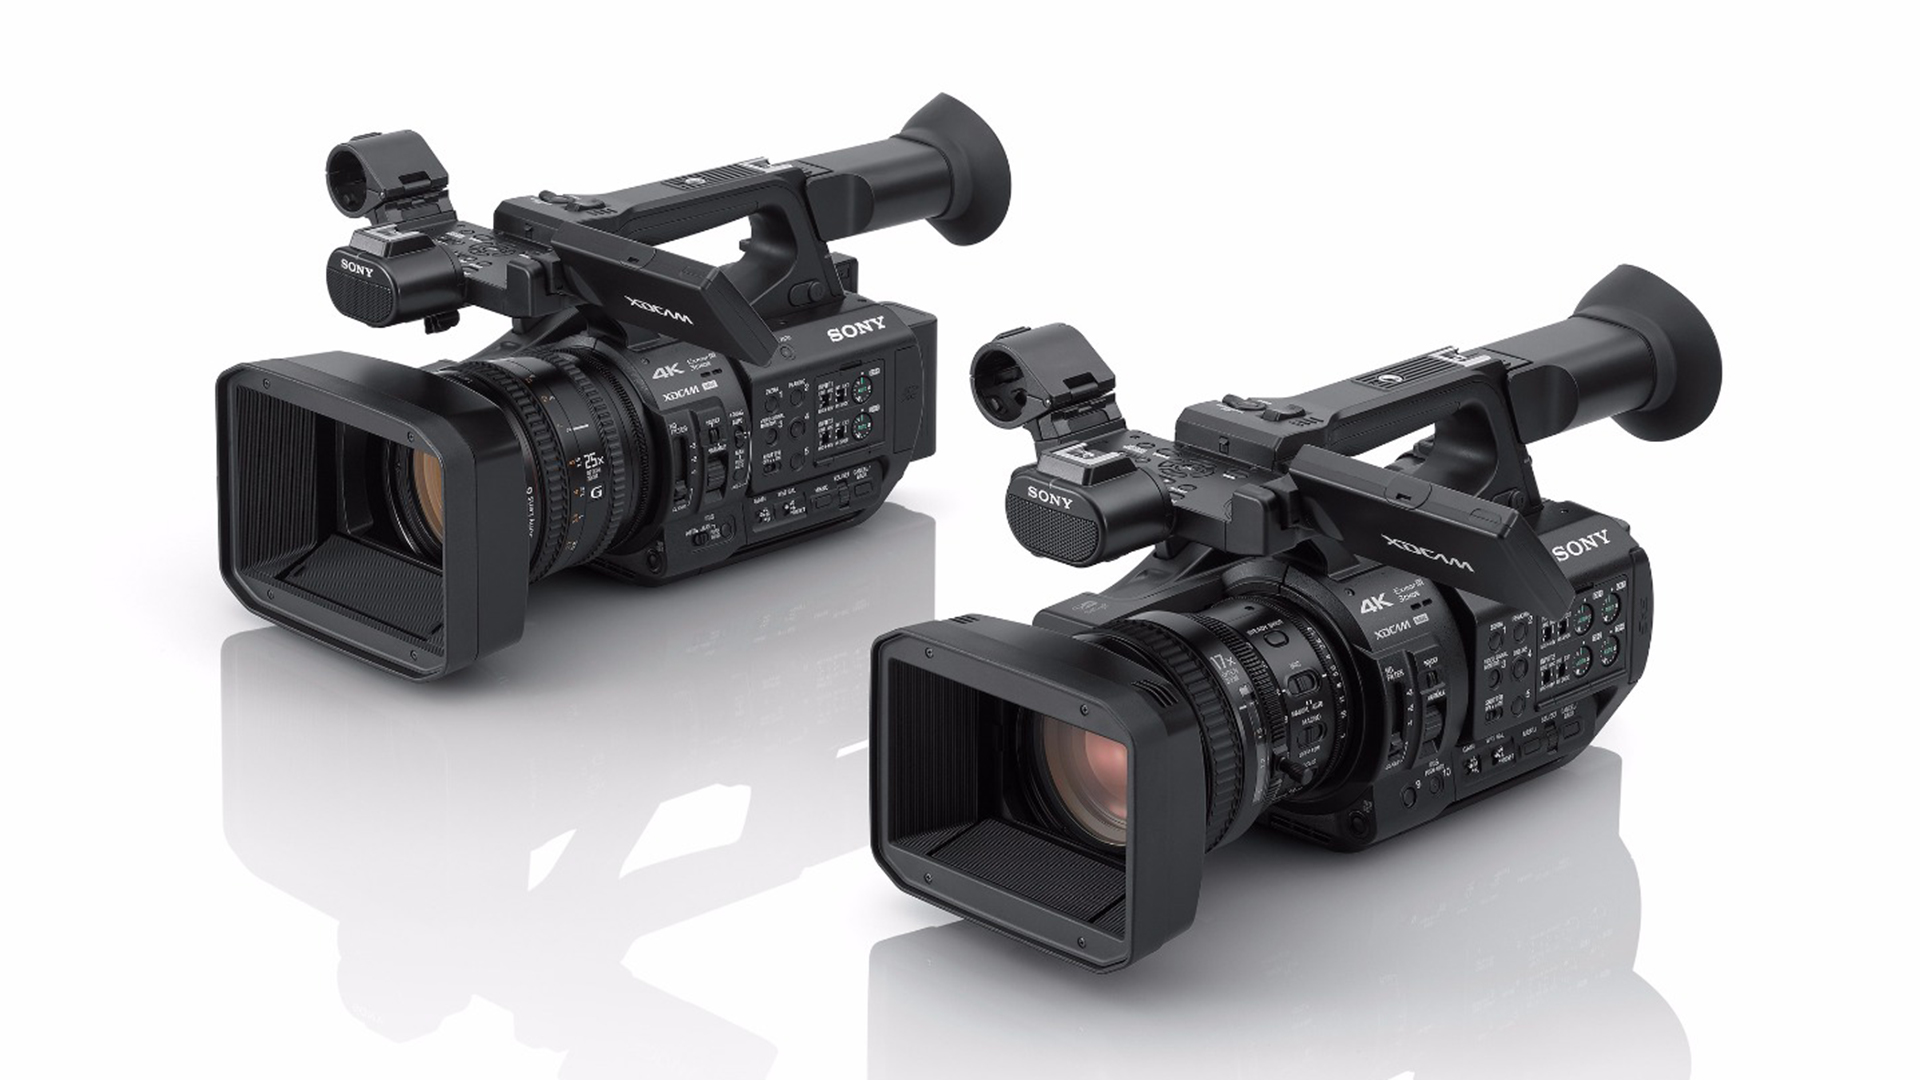 The Sony FS5 II is Officially Out, Z190 and Z280 Announced | CineD